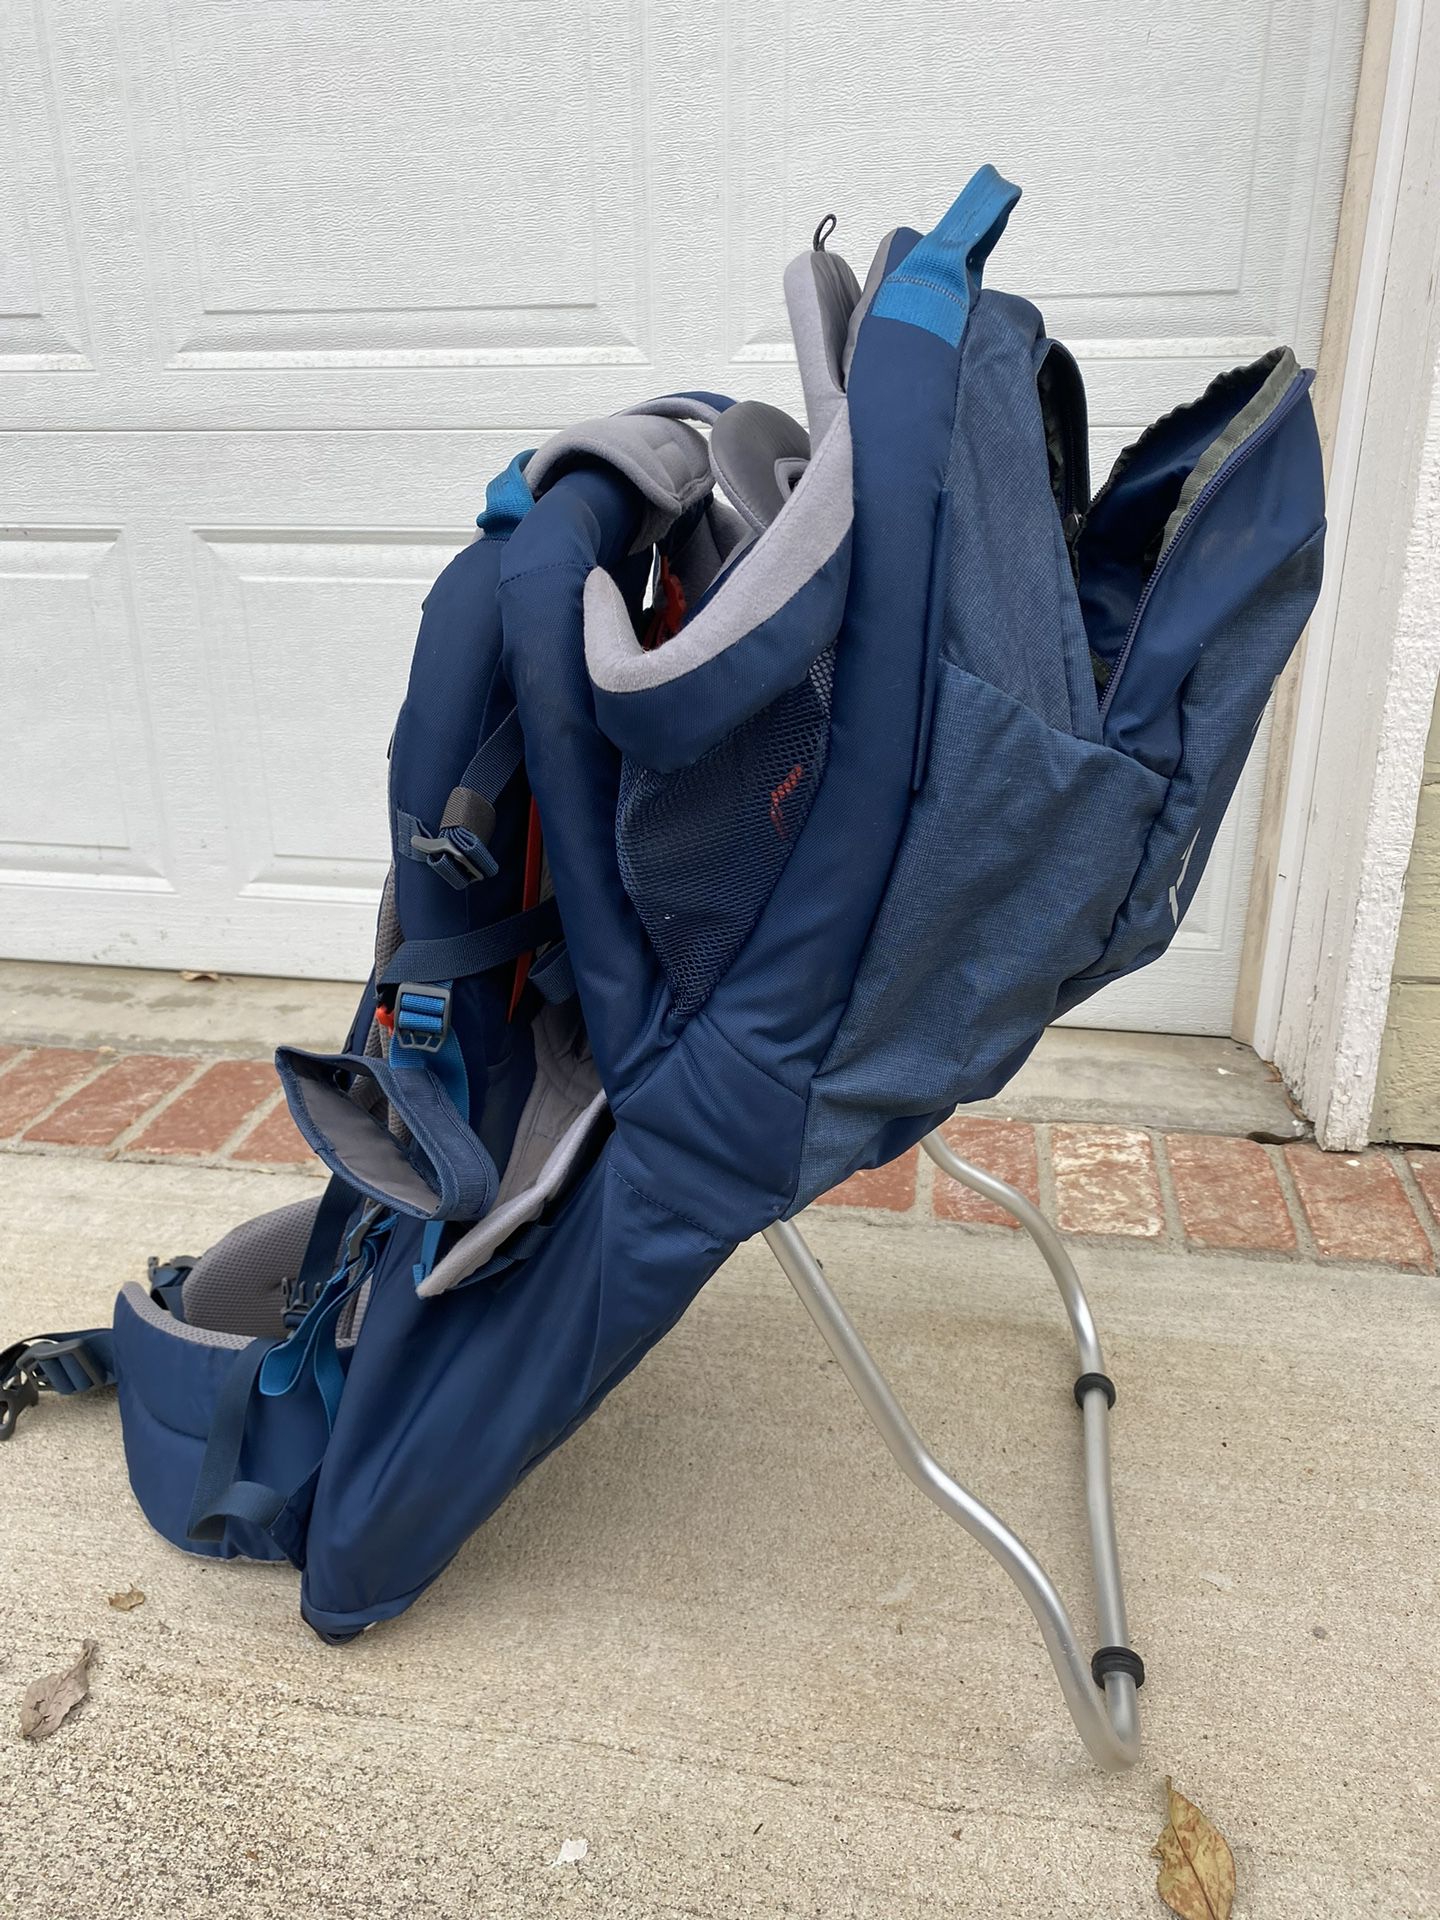 Kelty Child’s Hiking Backpack 